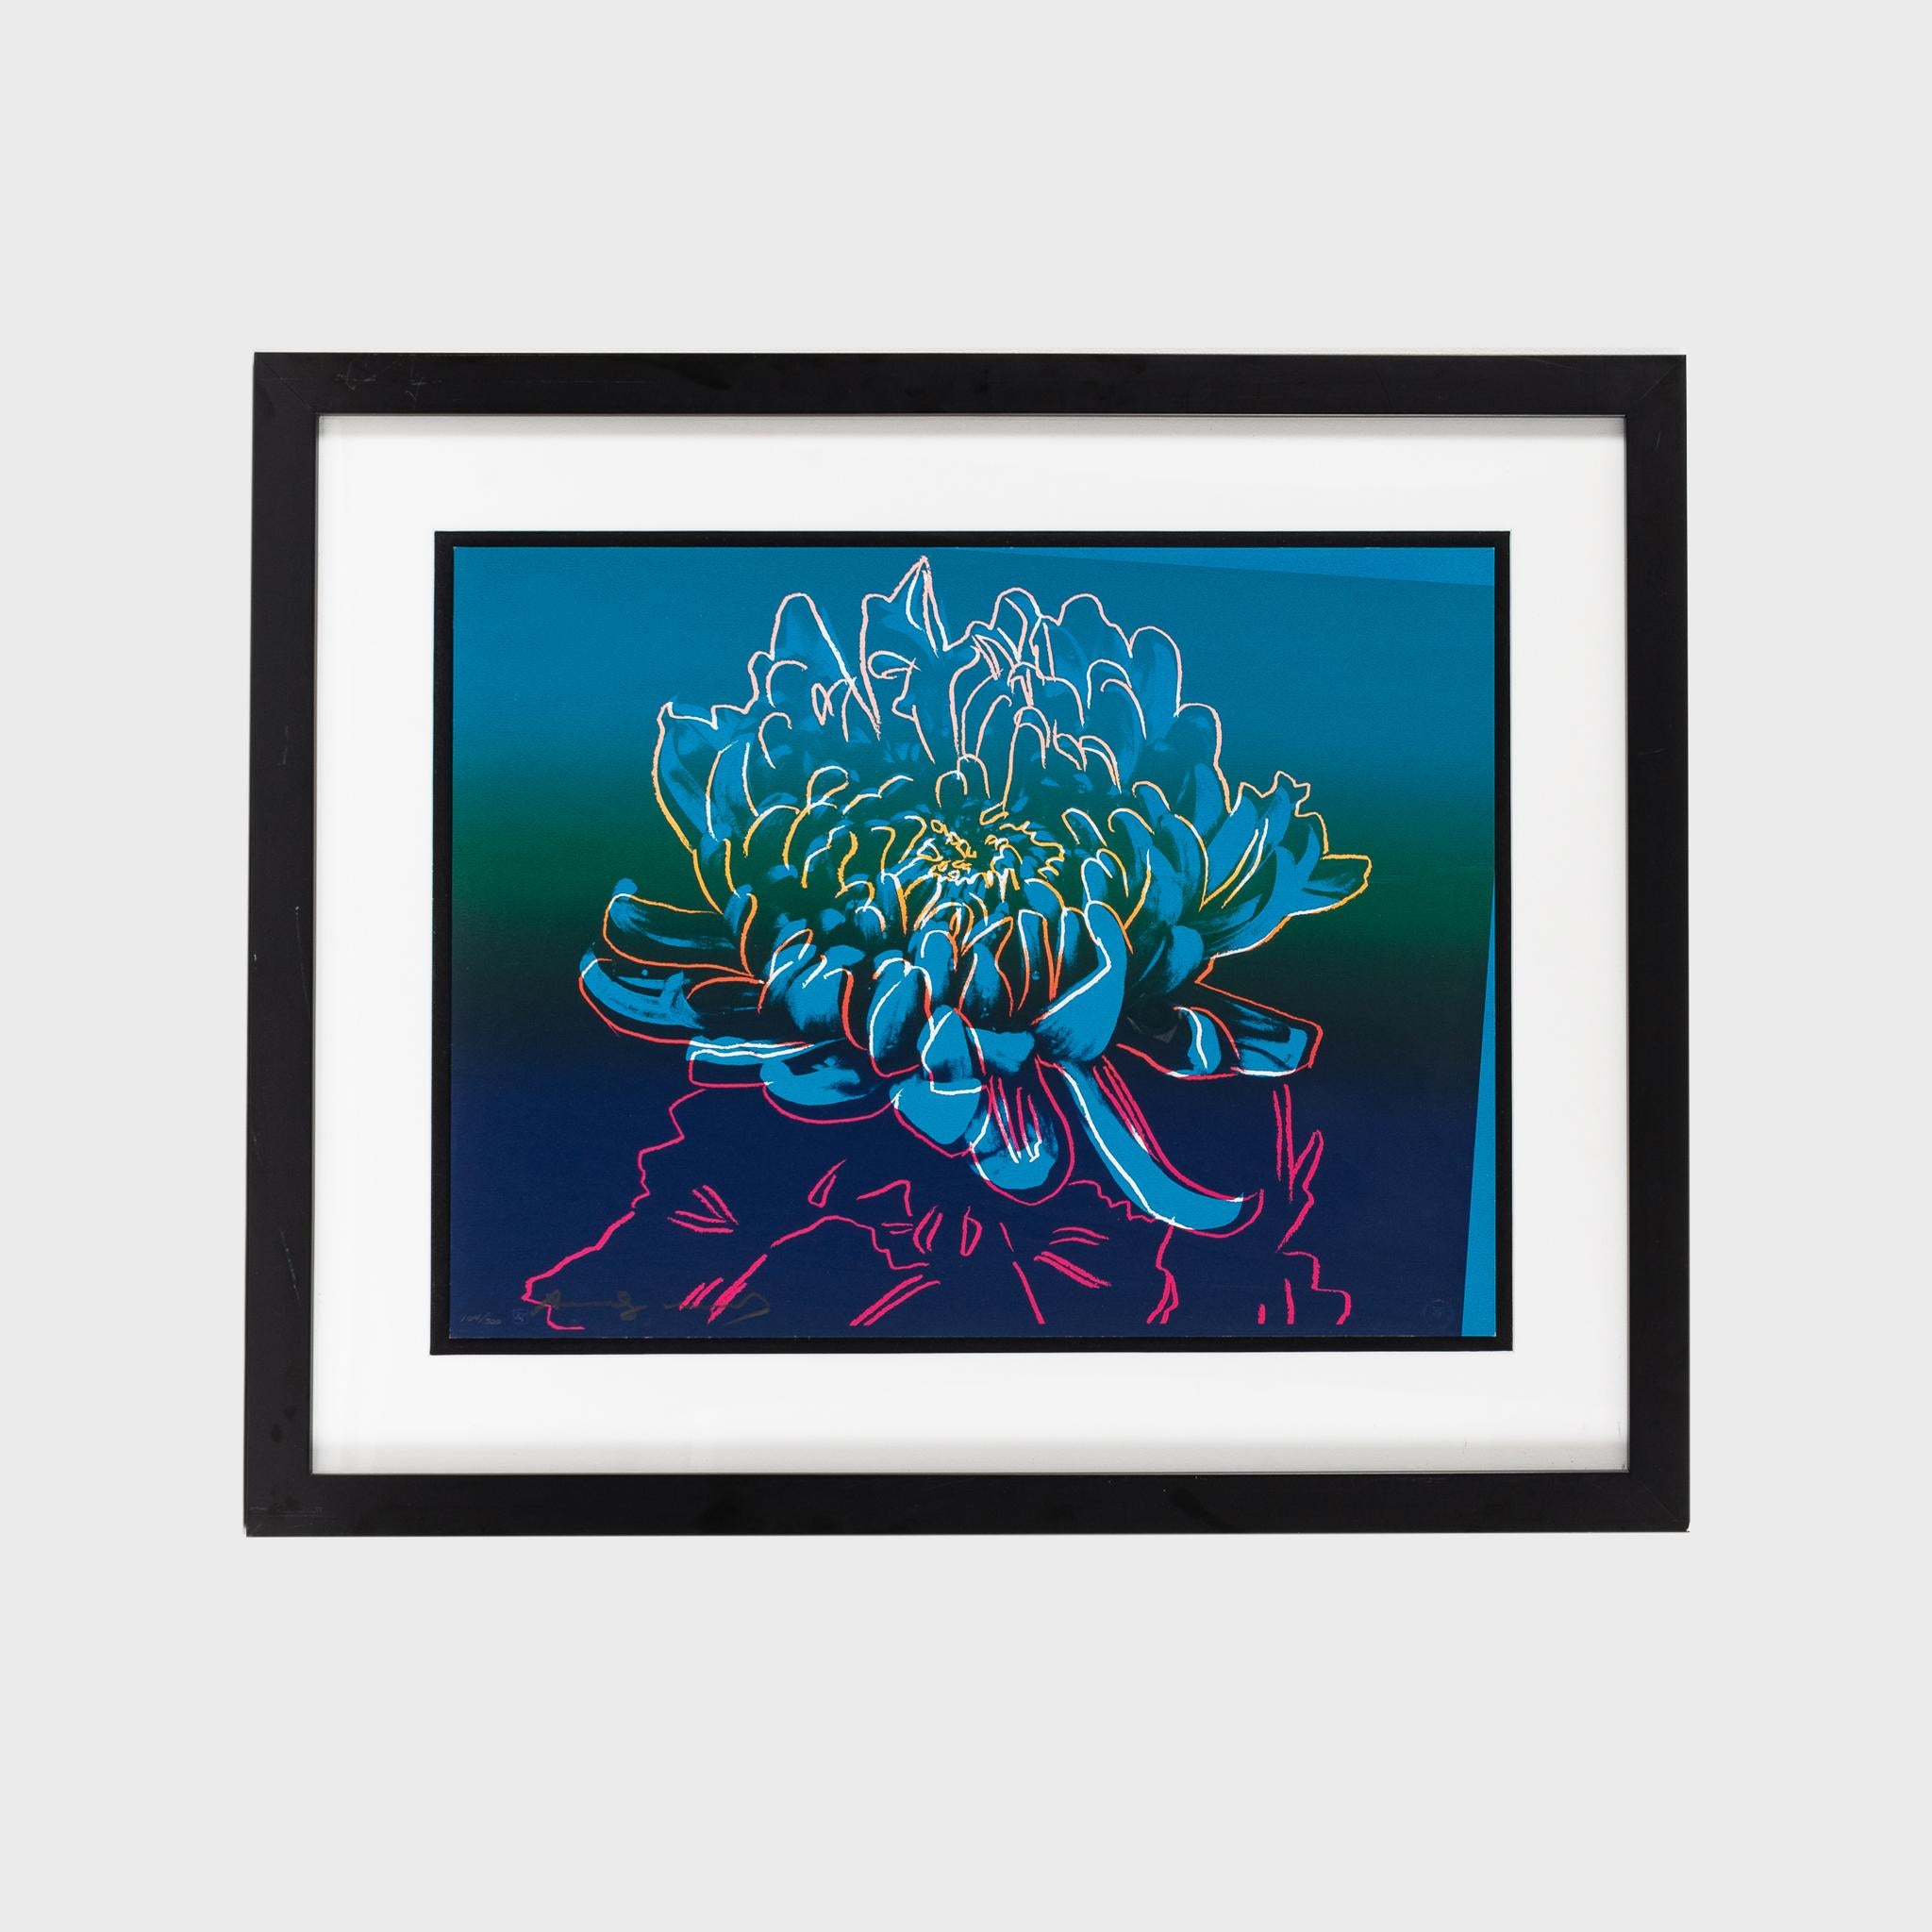 Screen print in colours on Rives BFK wove paper

Edition of 300

50 x 66 cm (19.7 x 26.1 in)

Frame: 74.5 x 90.6 cm (29.3 x 35.6 in)

Signed and numbered on the front

Prints are in excellent condition considering their age. Under inspection there